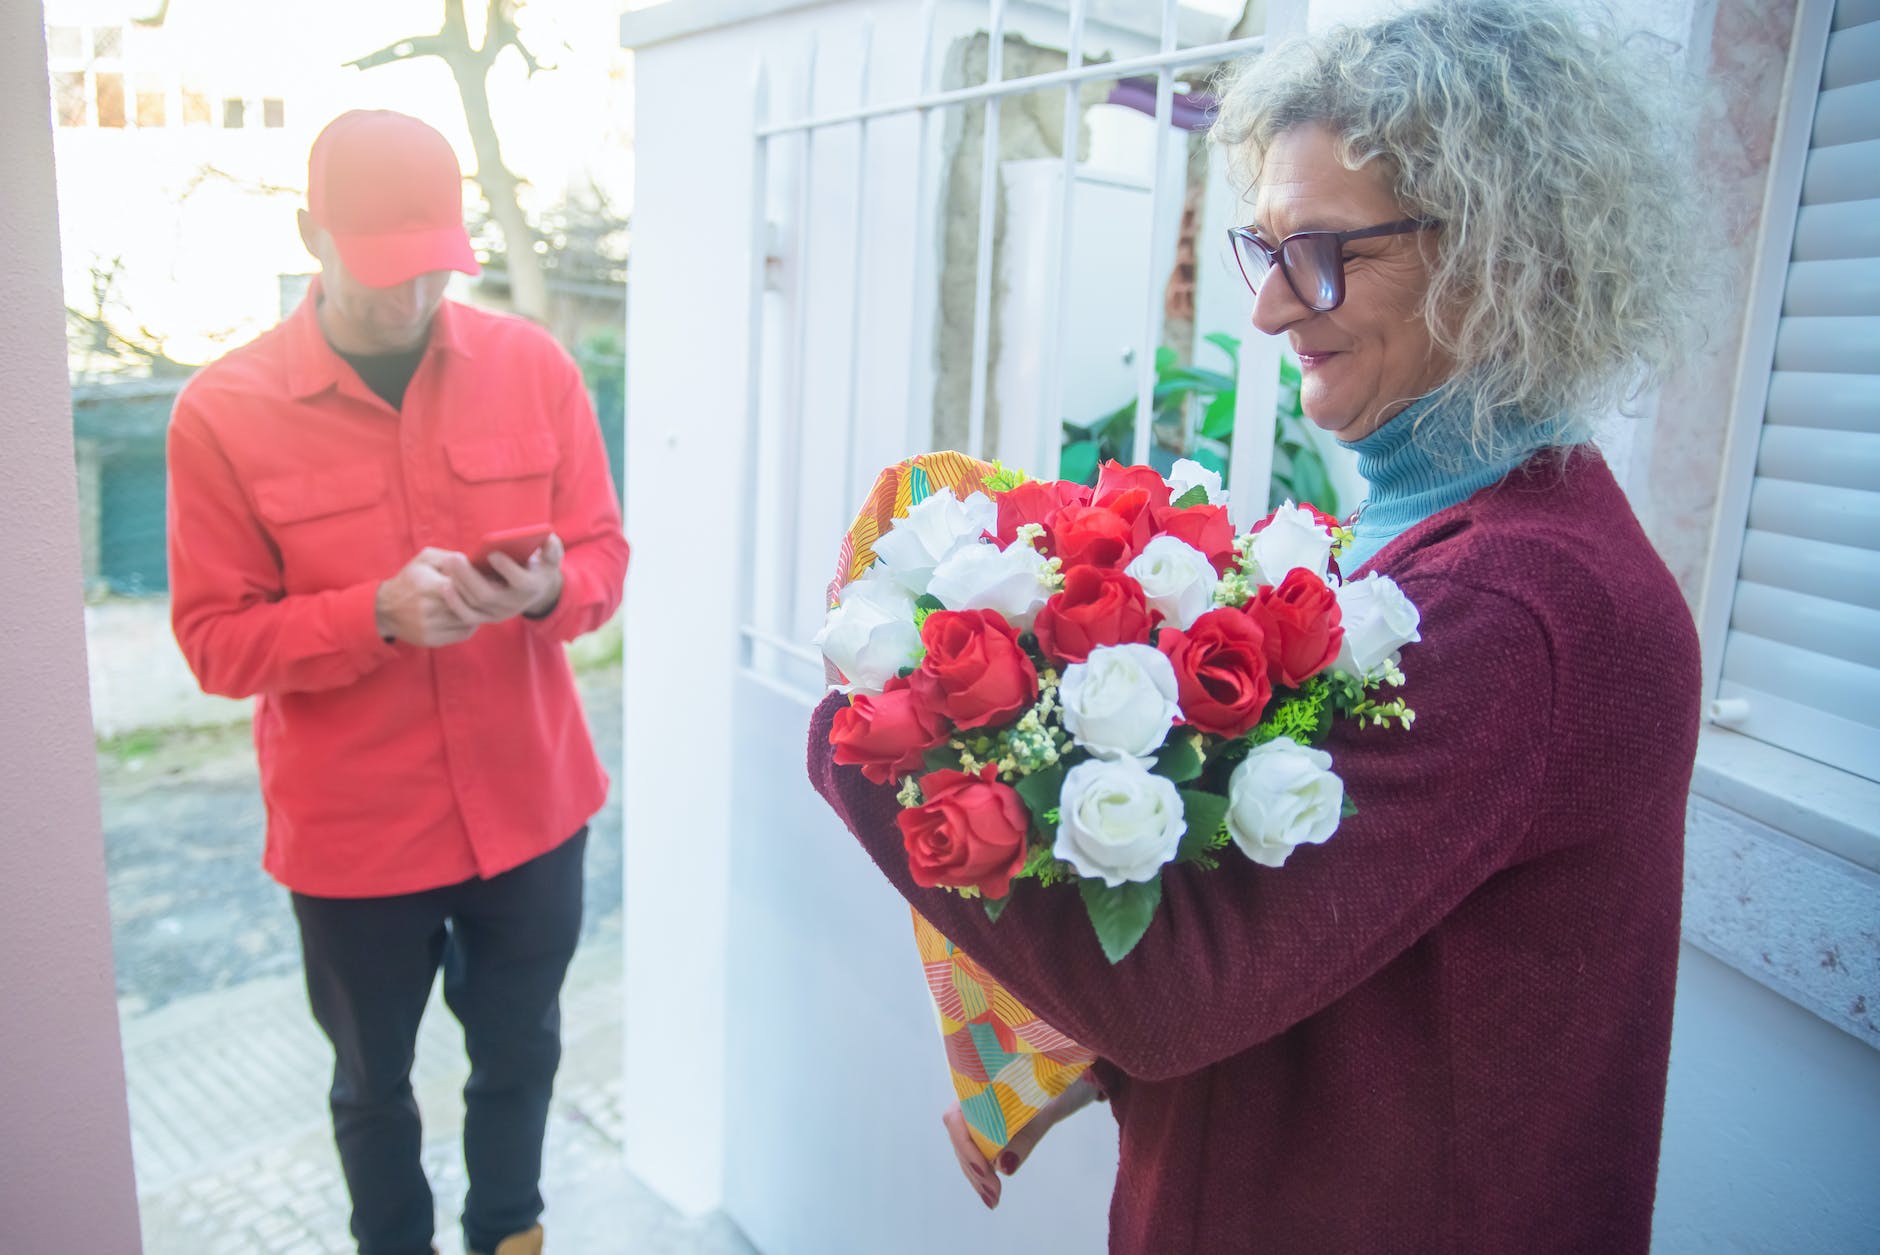 Consumer’s Guide To Online Flower Delivery